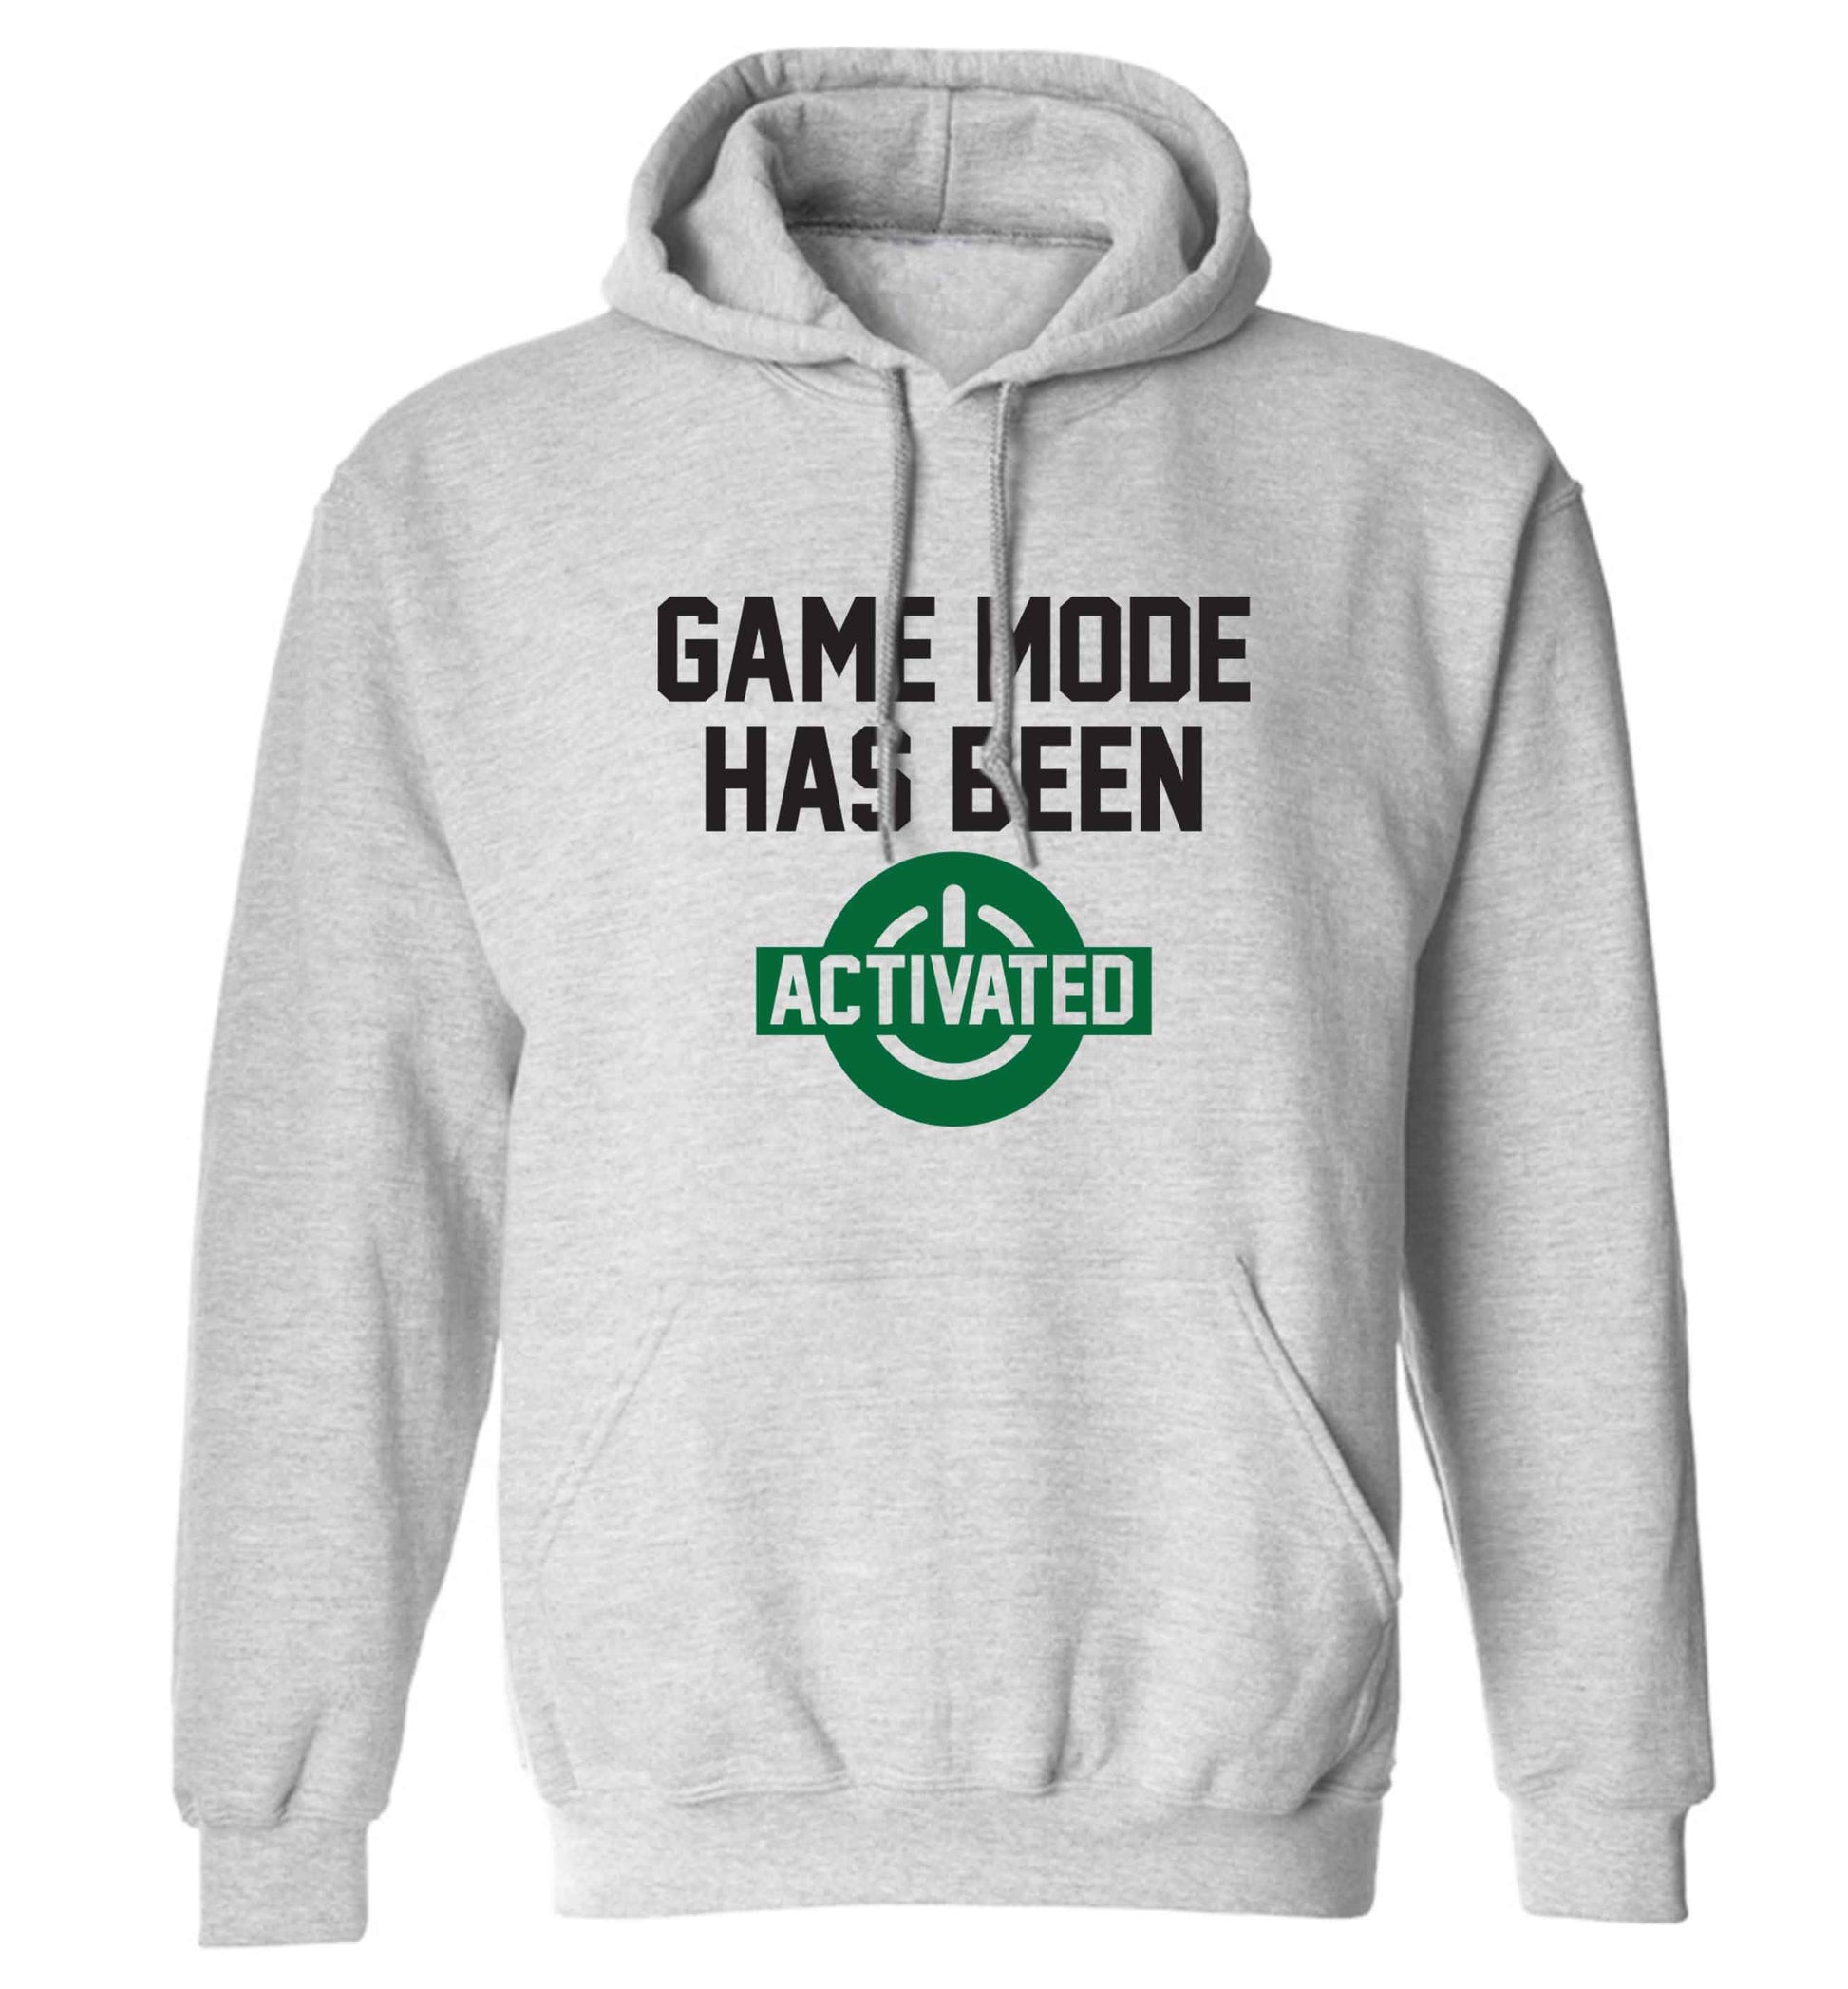 Game mode has been activated adults unisex grey hoodie 2XL